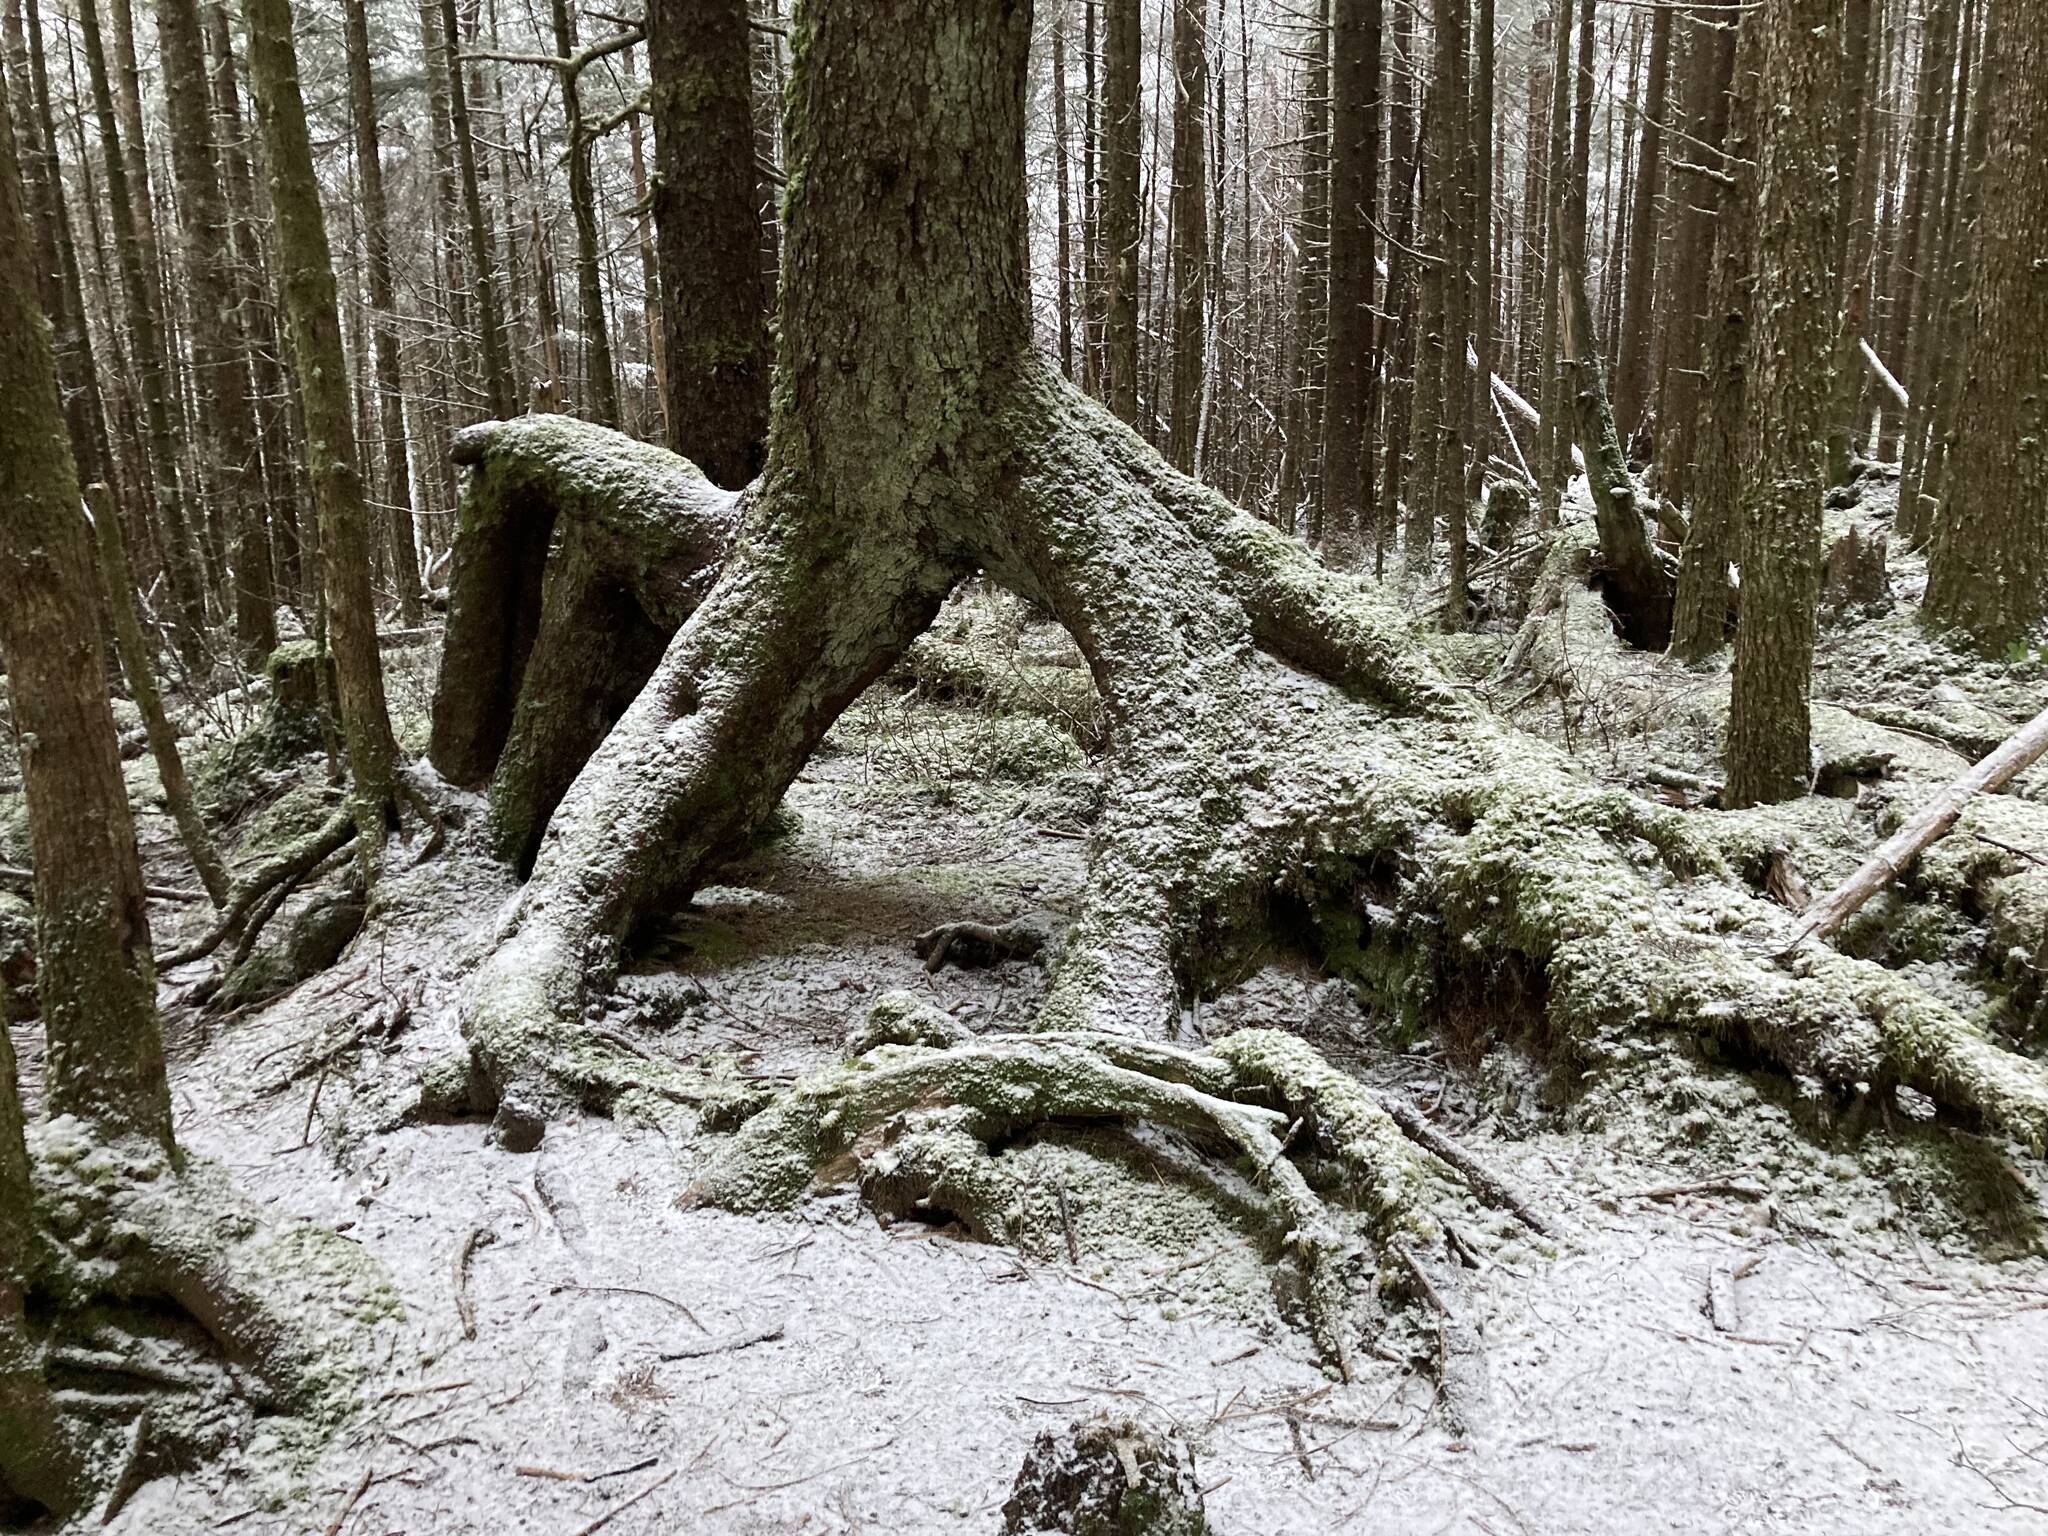 A mature spruce tree grows on stilt roots, its nurse log long gone into the soil. (Mary F. Willson / For the Juneau Empire)